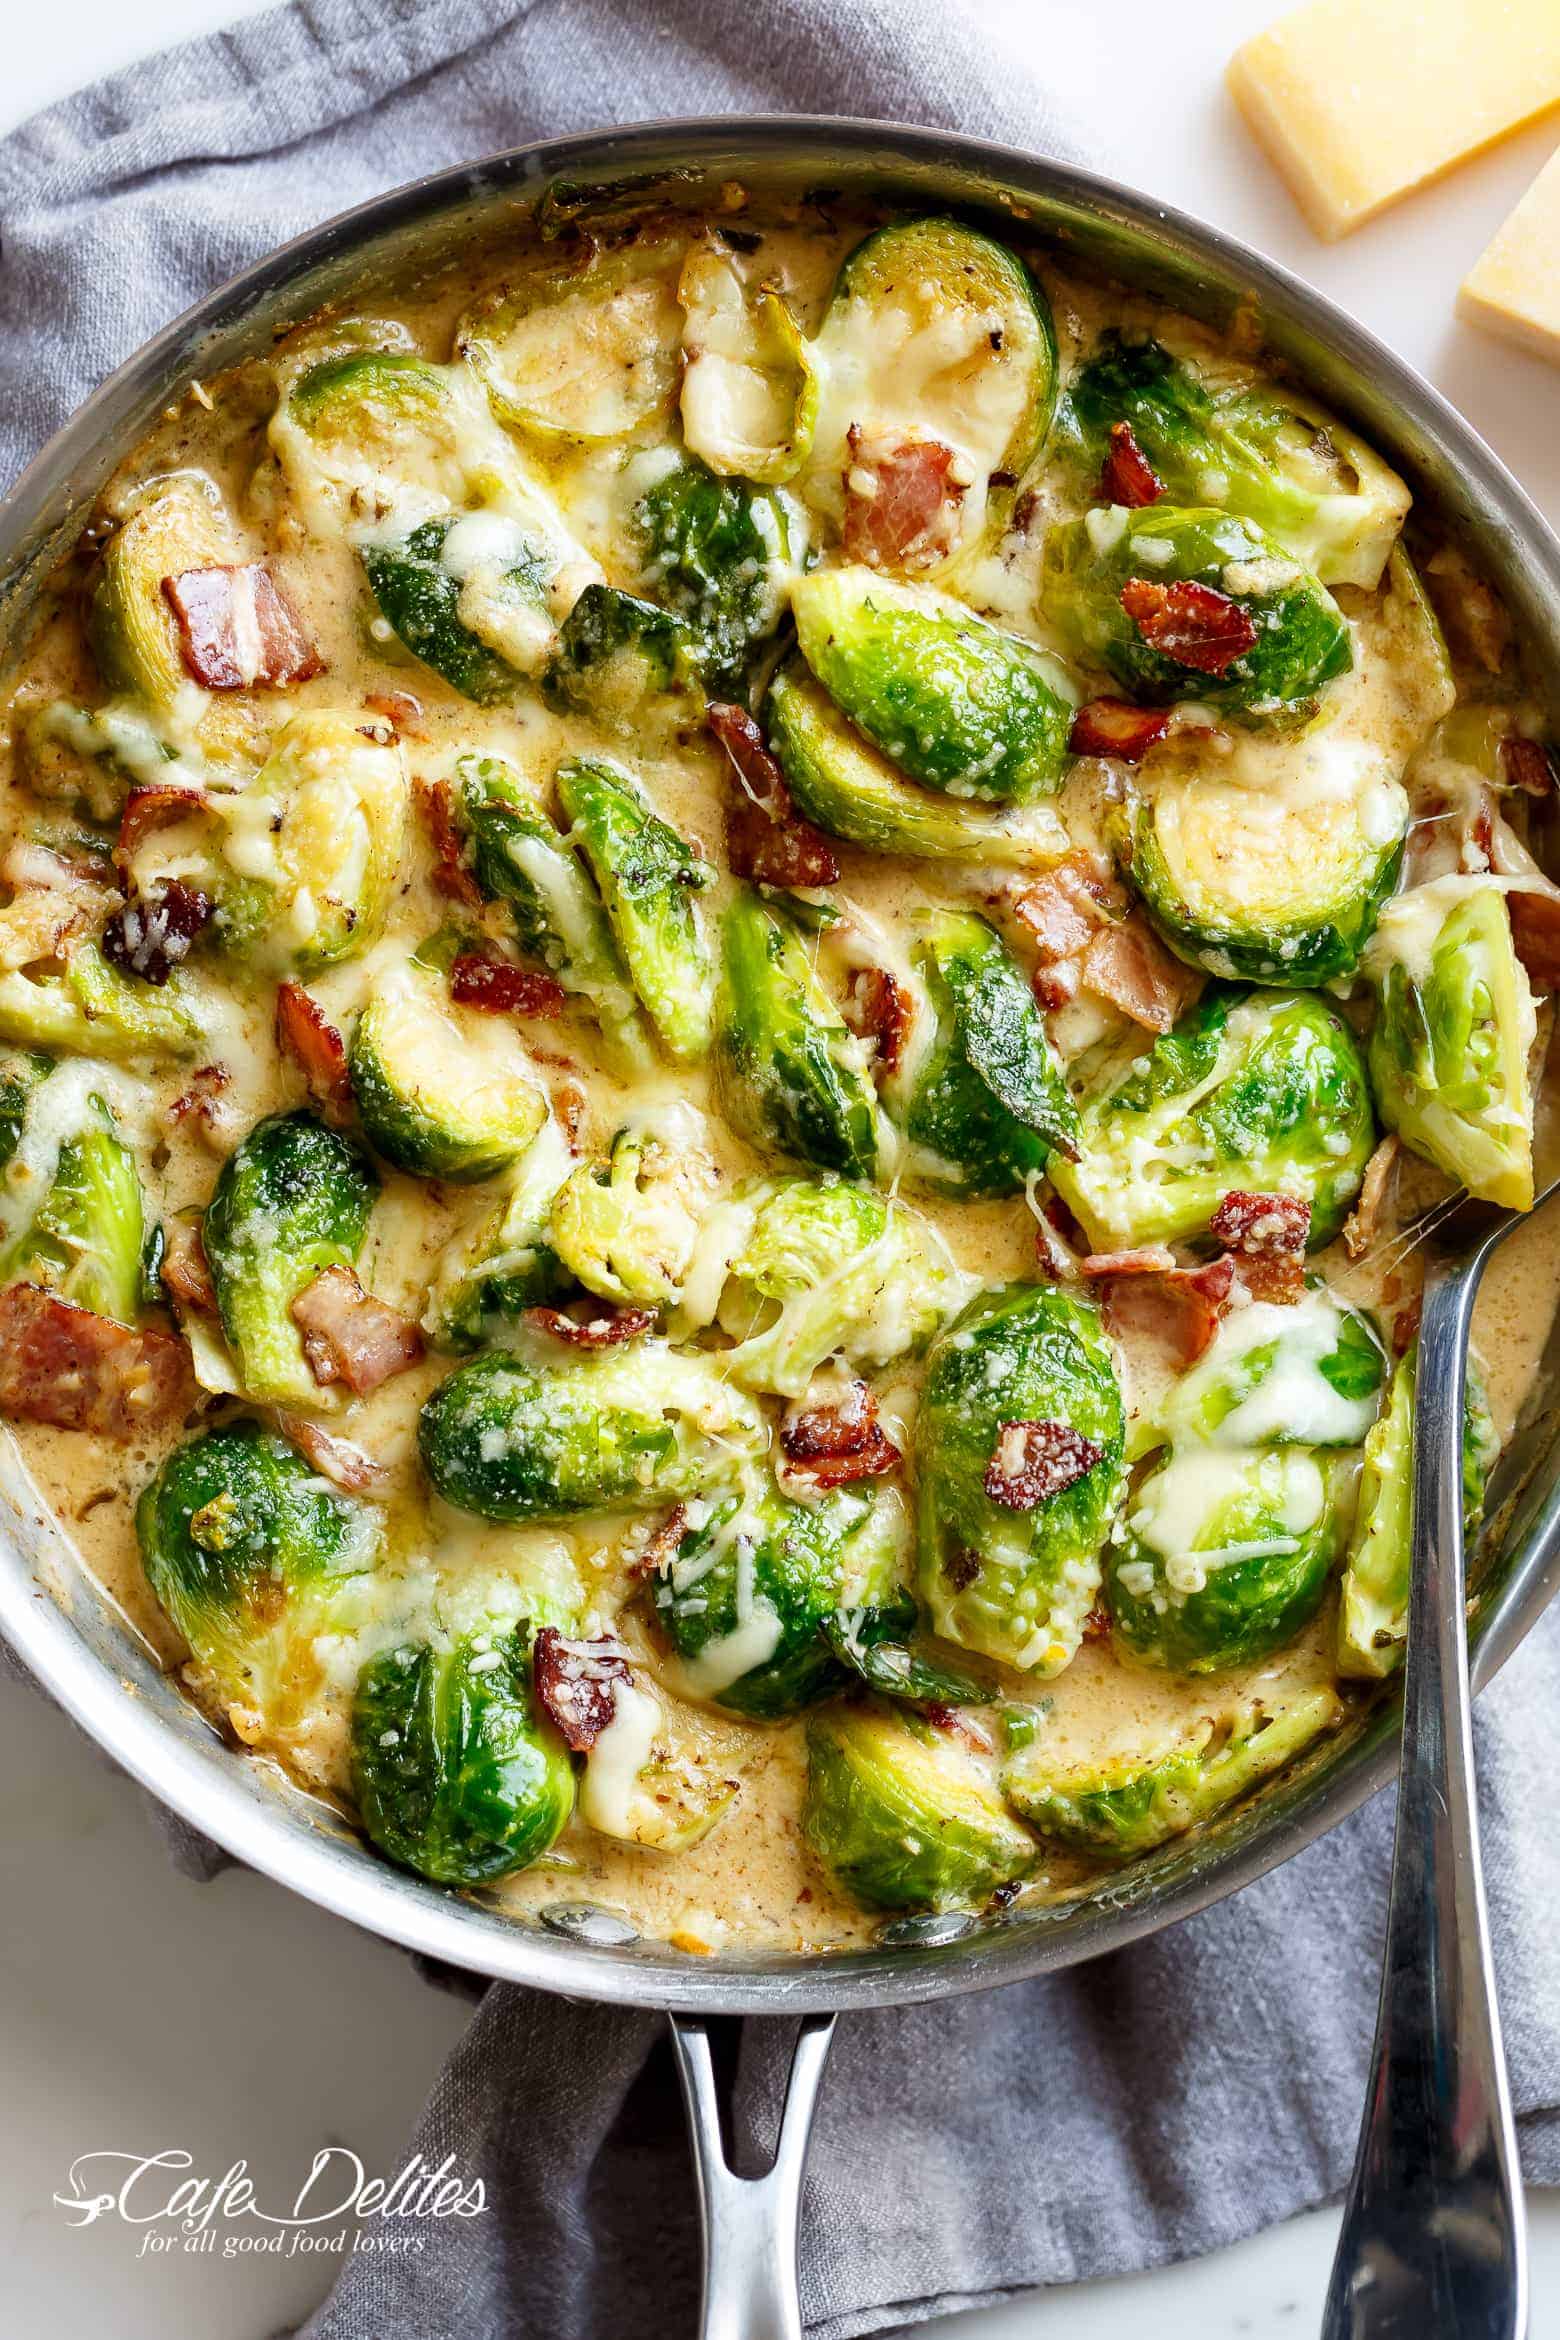  Creamy Garlic Parmesan Brussels Sprouts With Bacon